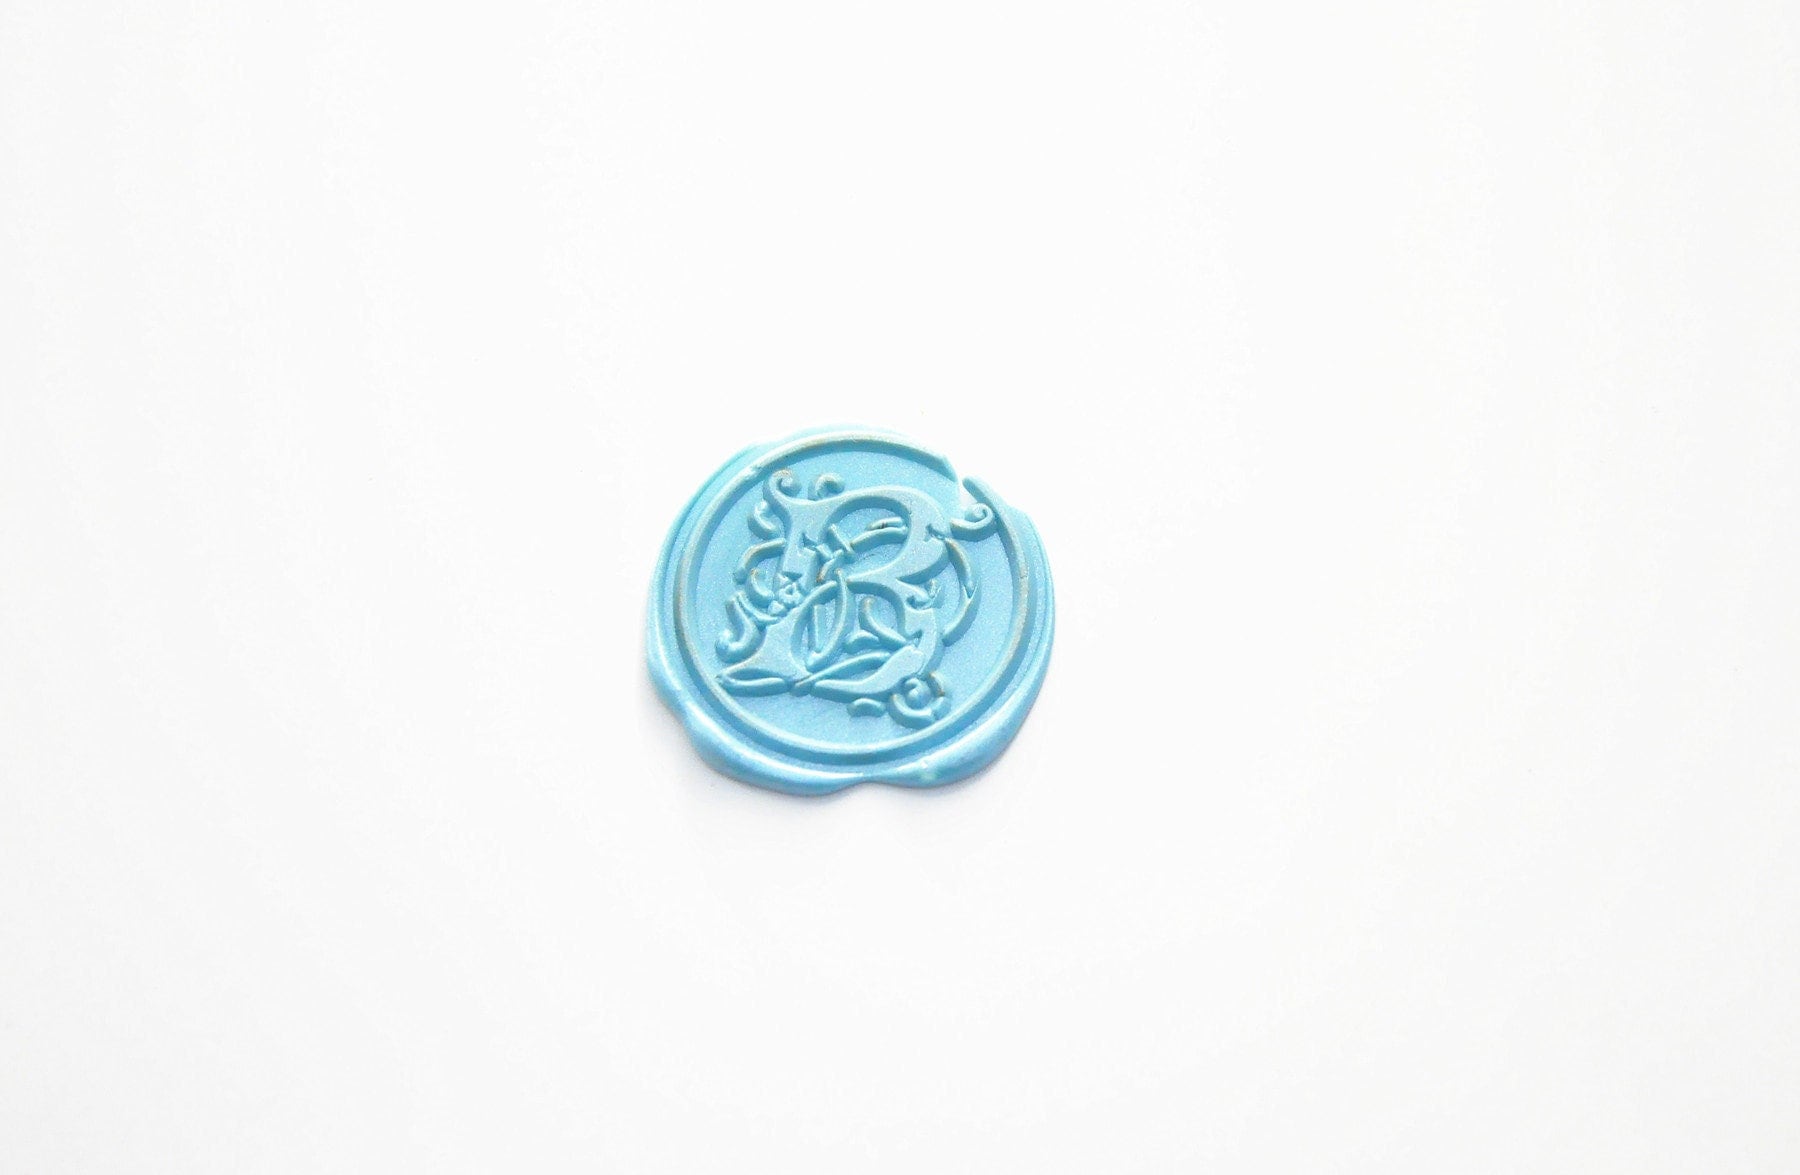 CALLIGRAPHY INITIAL Stamp Wax Seal Stamp / Custom Letter / Wedding